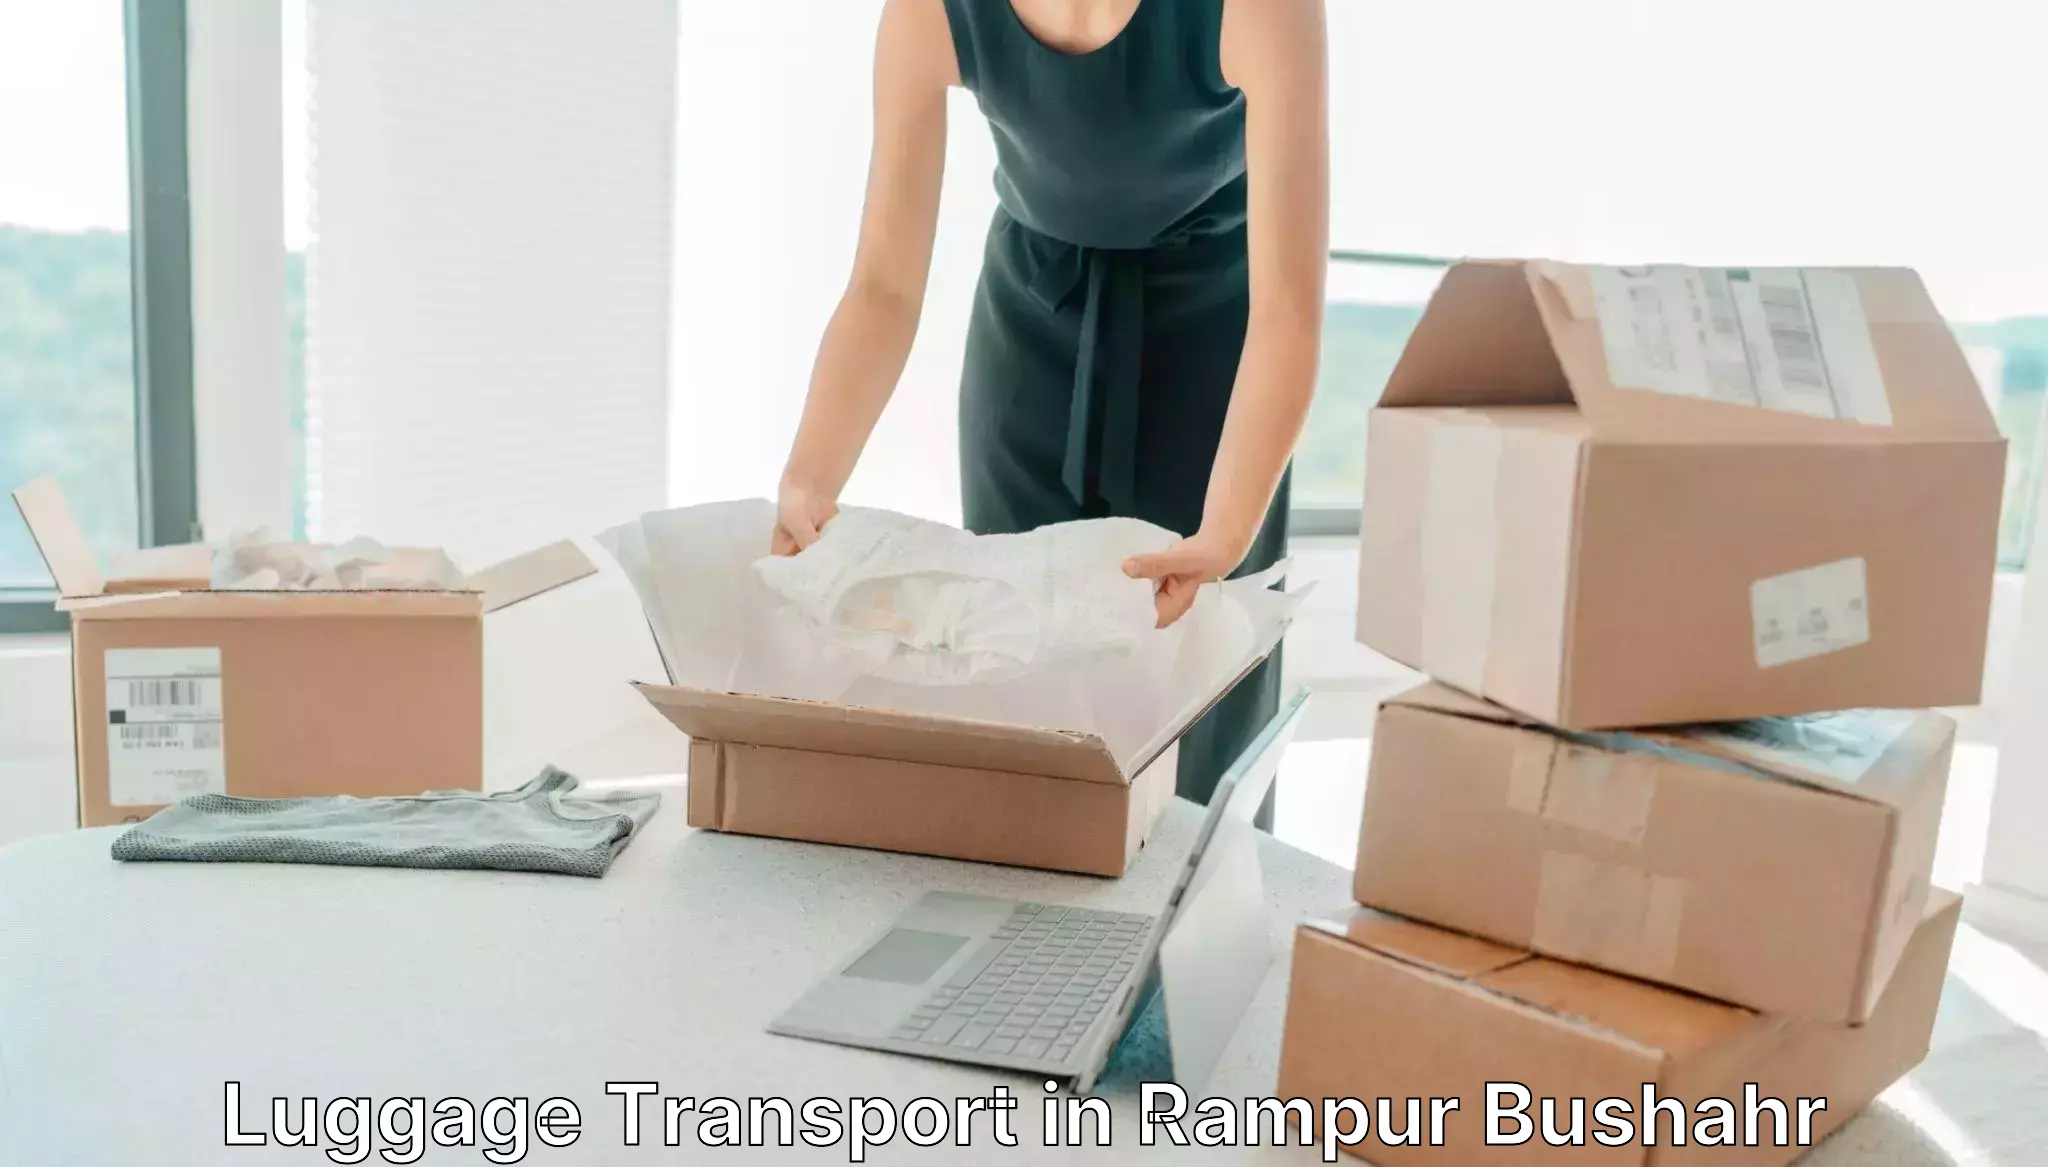 Fast track baggage delivery in Rampur Bushahr